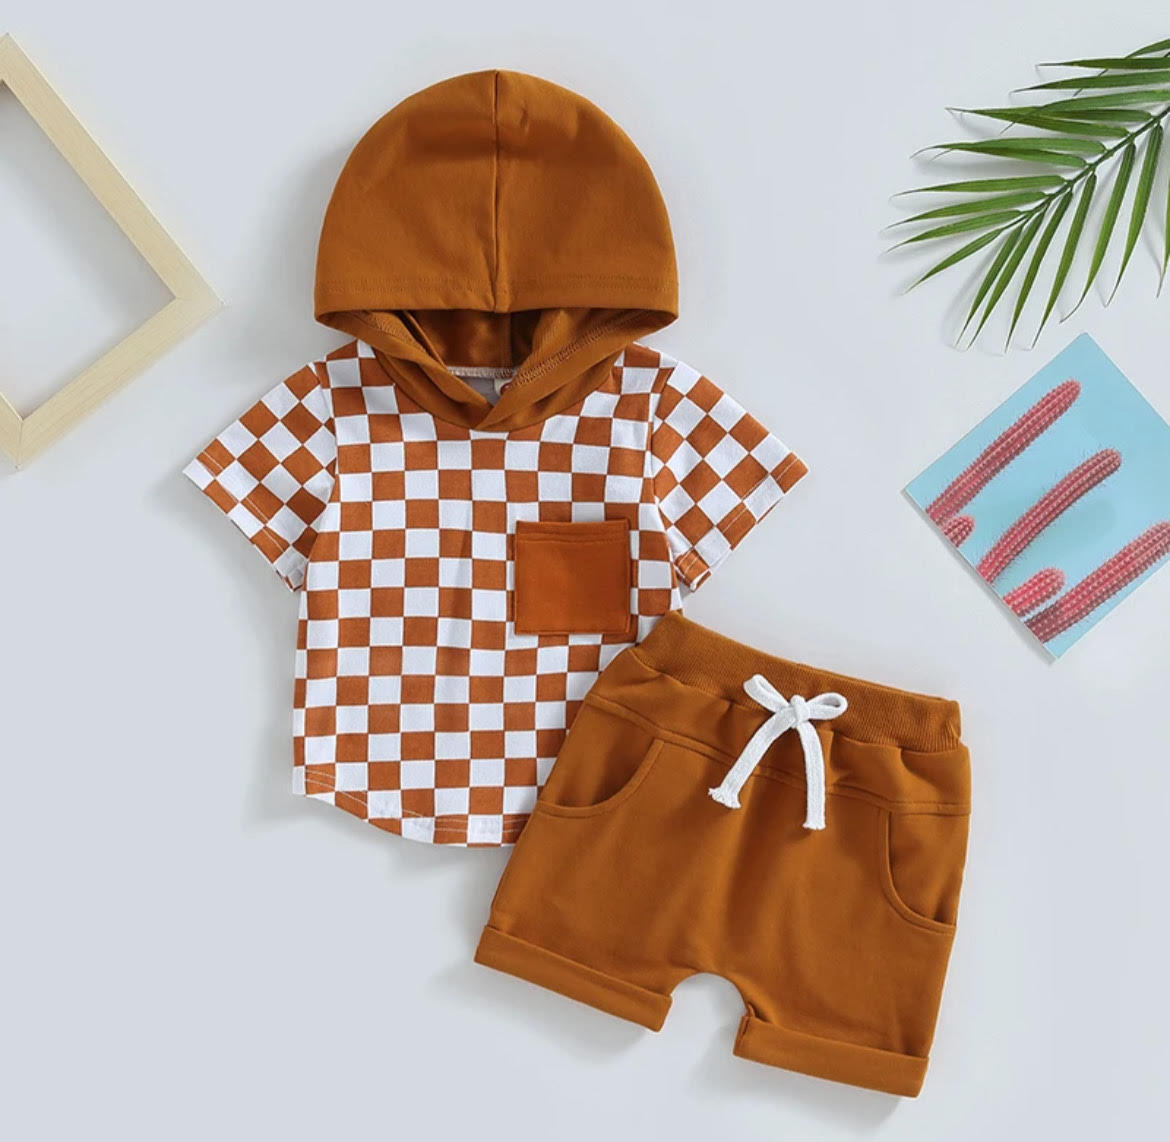 Boys 2 Piece Shorts Sets - Rust Checkered with Rust Pockets